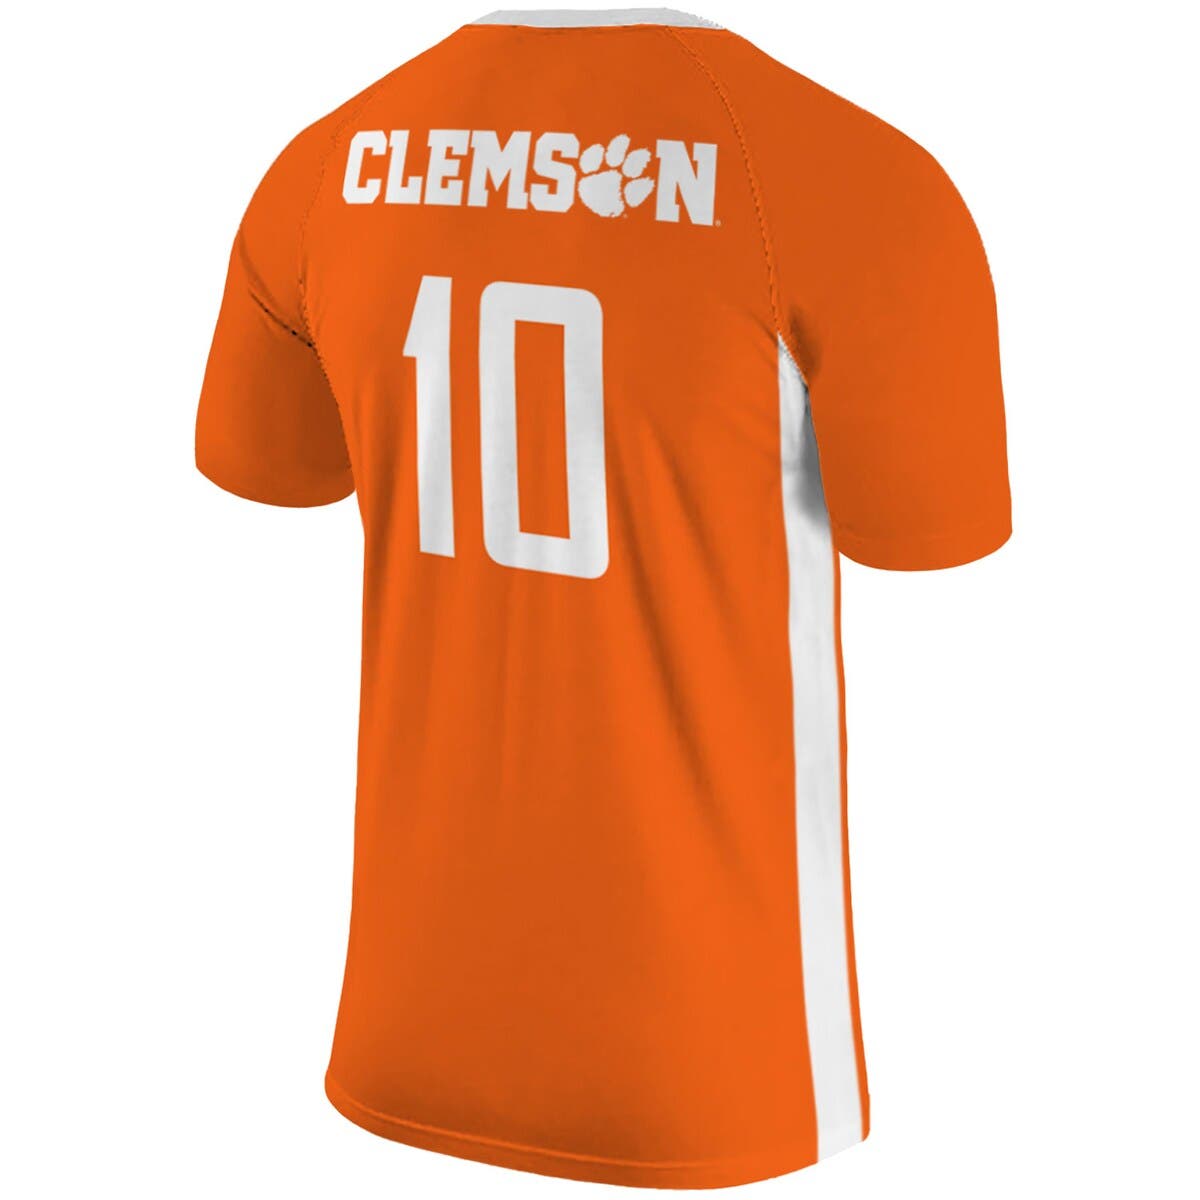 Tigers soccer jersey numbers